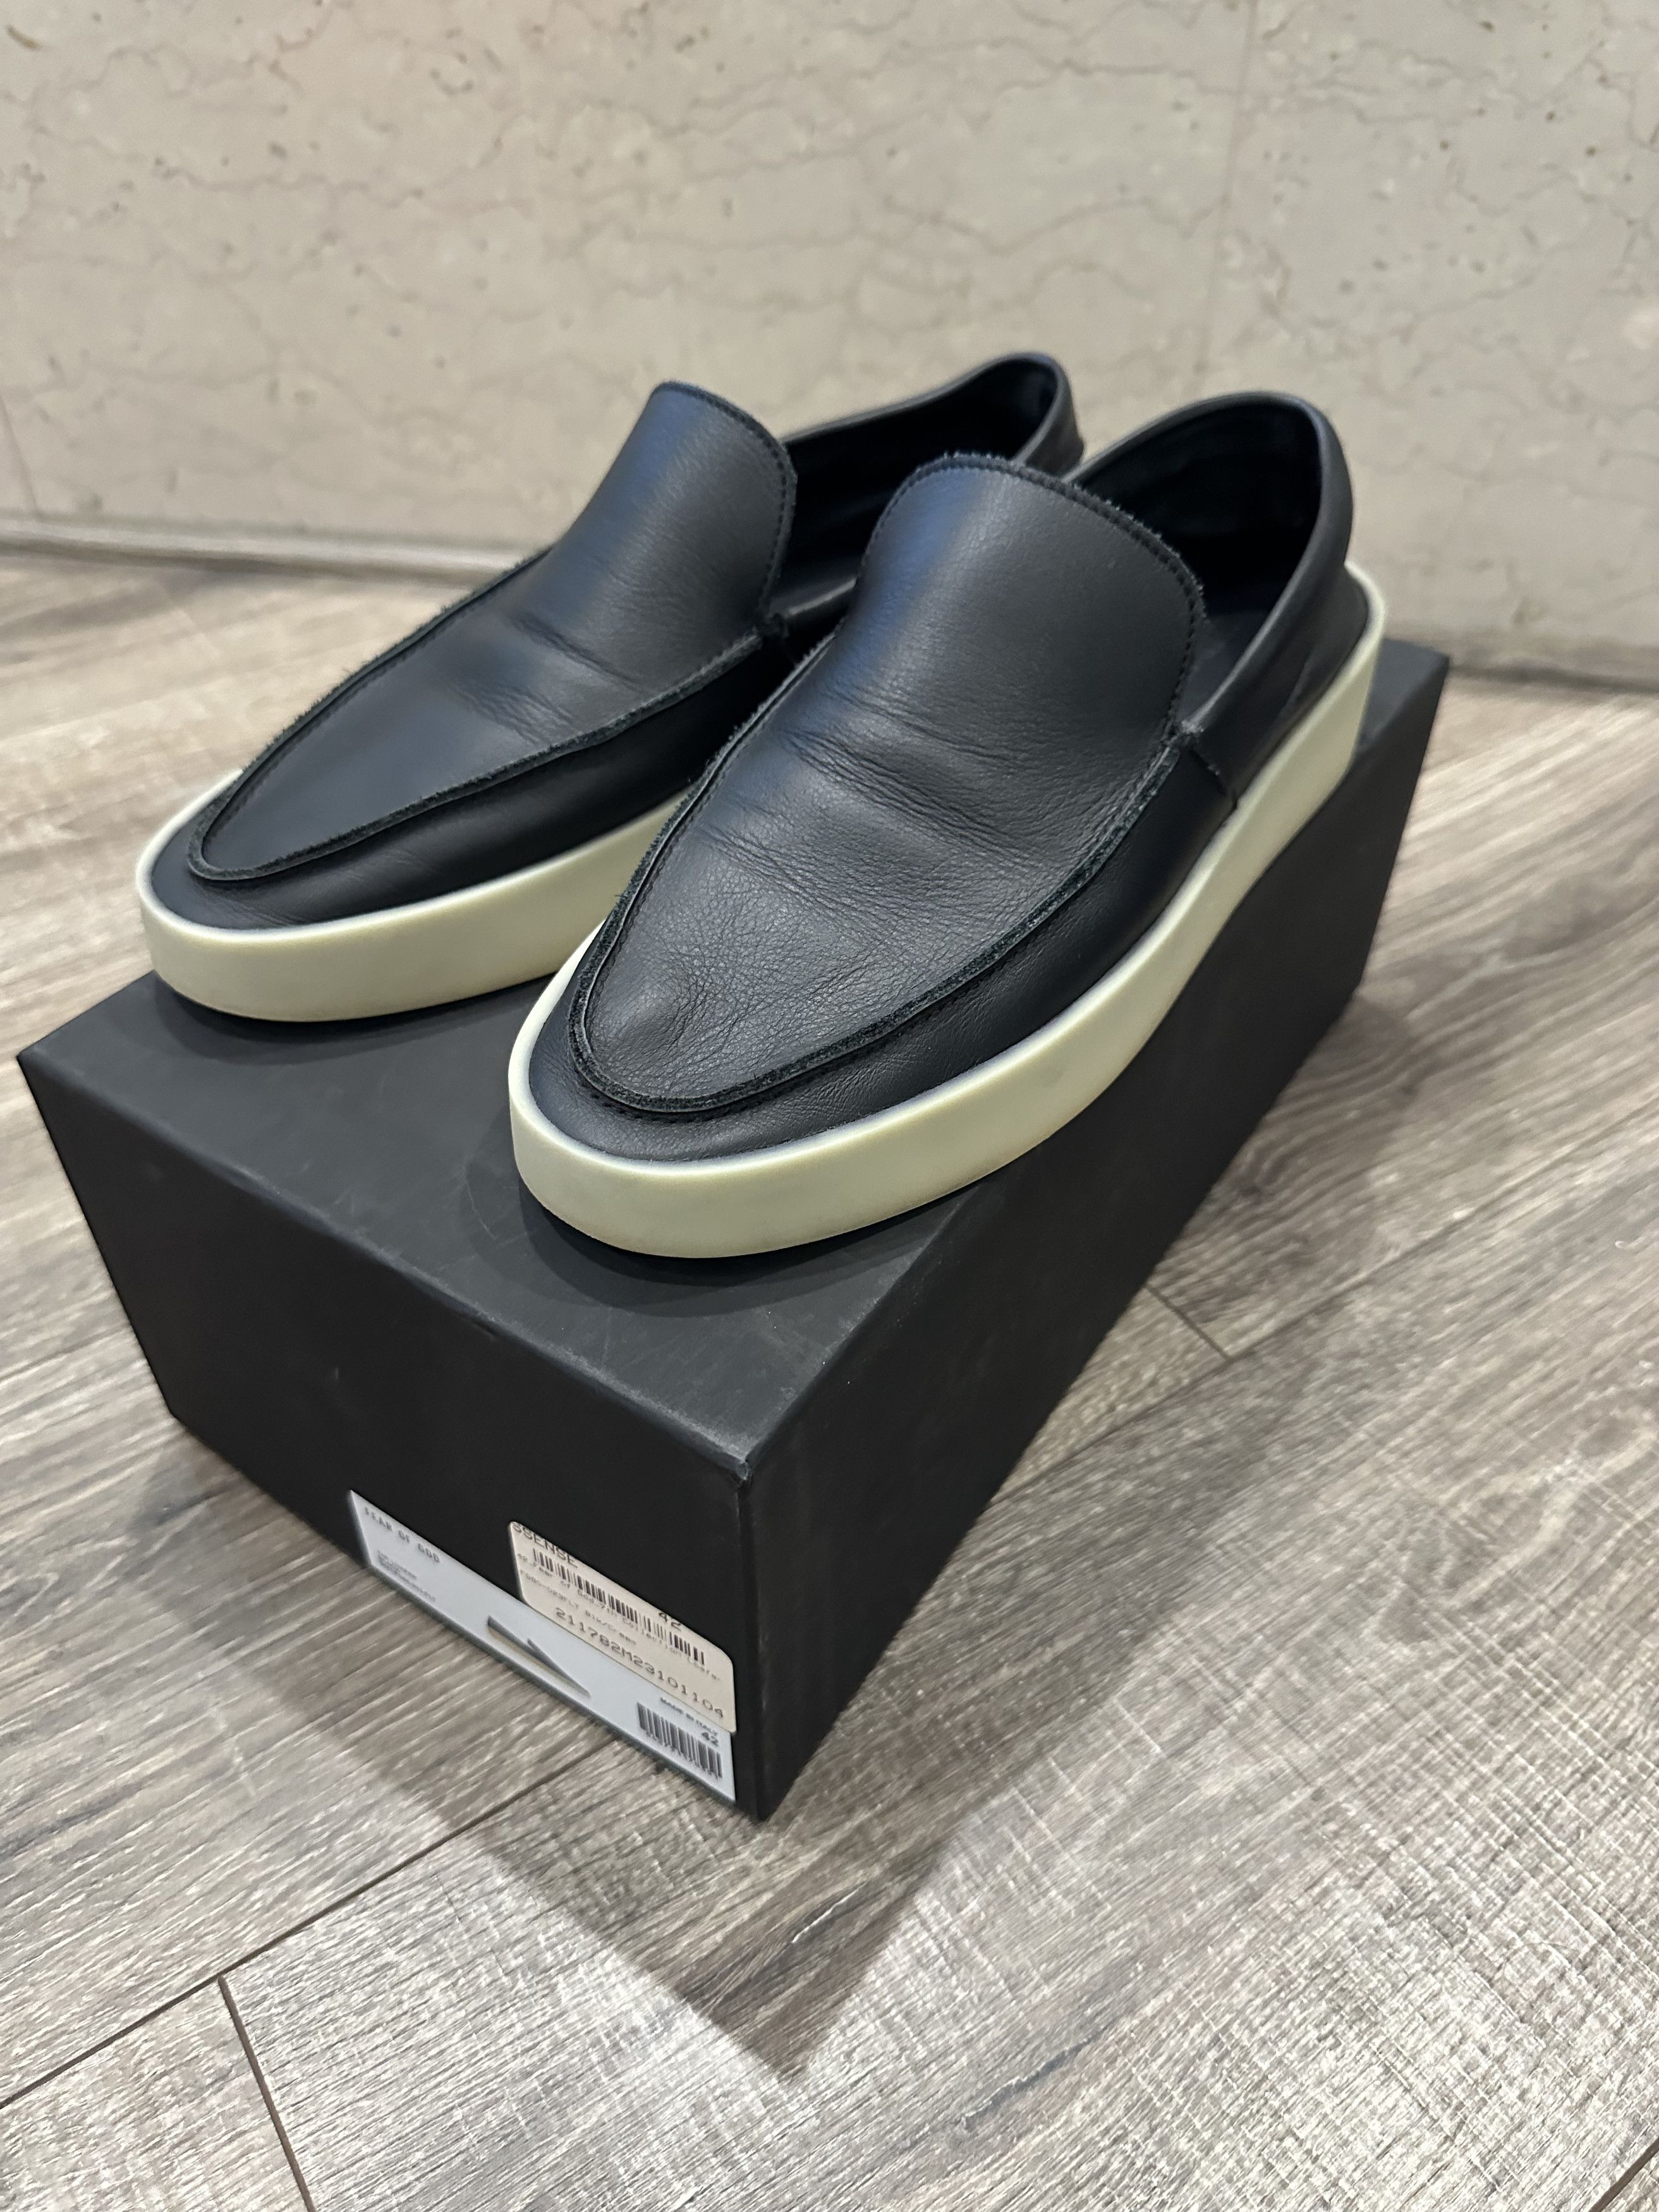 Fear of God The Loafer [Seventh Collection] | Grailed